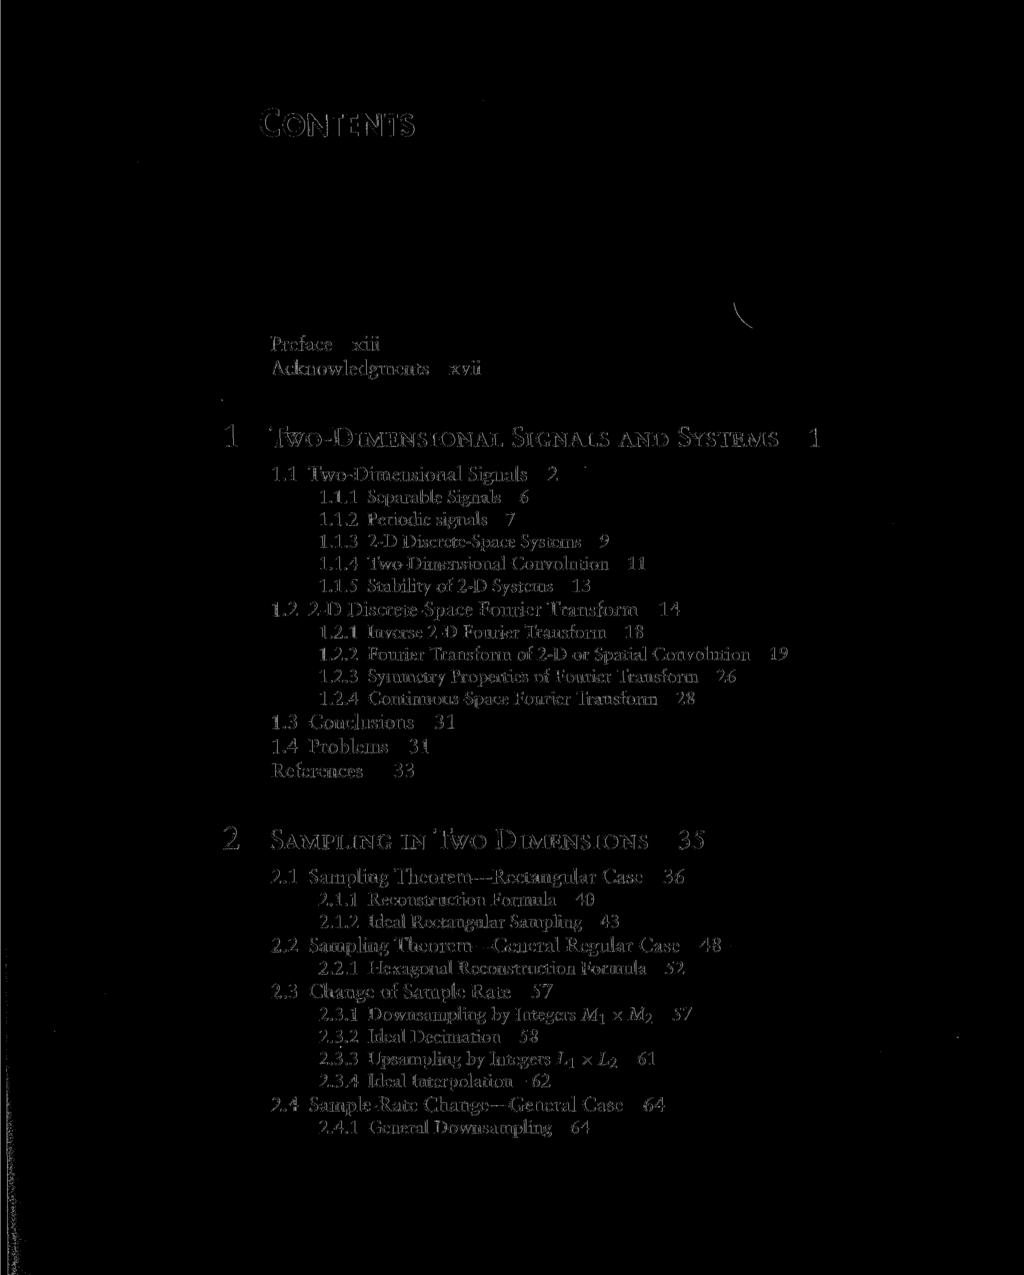 CONTENTS Preface xiii Acknowledgments xvii v 1 TWO-DIMENSIONAL SiGNALS AND SYSTEMS 1 1.1 Two-Dimensional Signals 2 1.1.1 Separable Signals 6 1.1.2 Periodic signals 7 1.1.3 2-D Discrete-Space Systems 9 1.